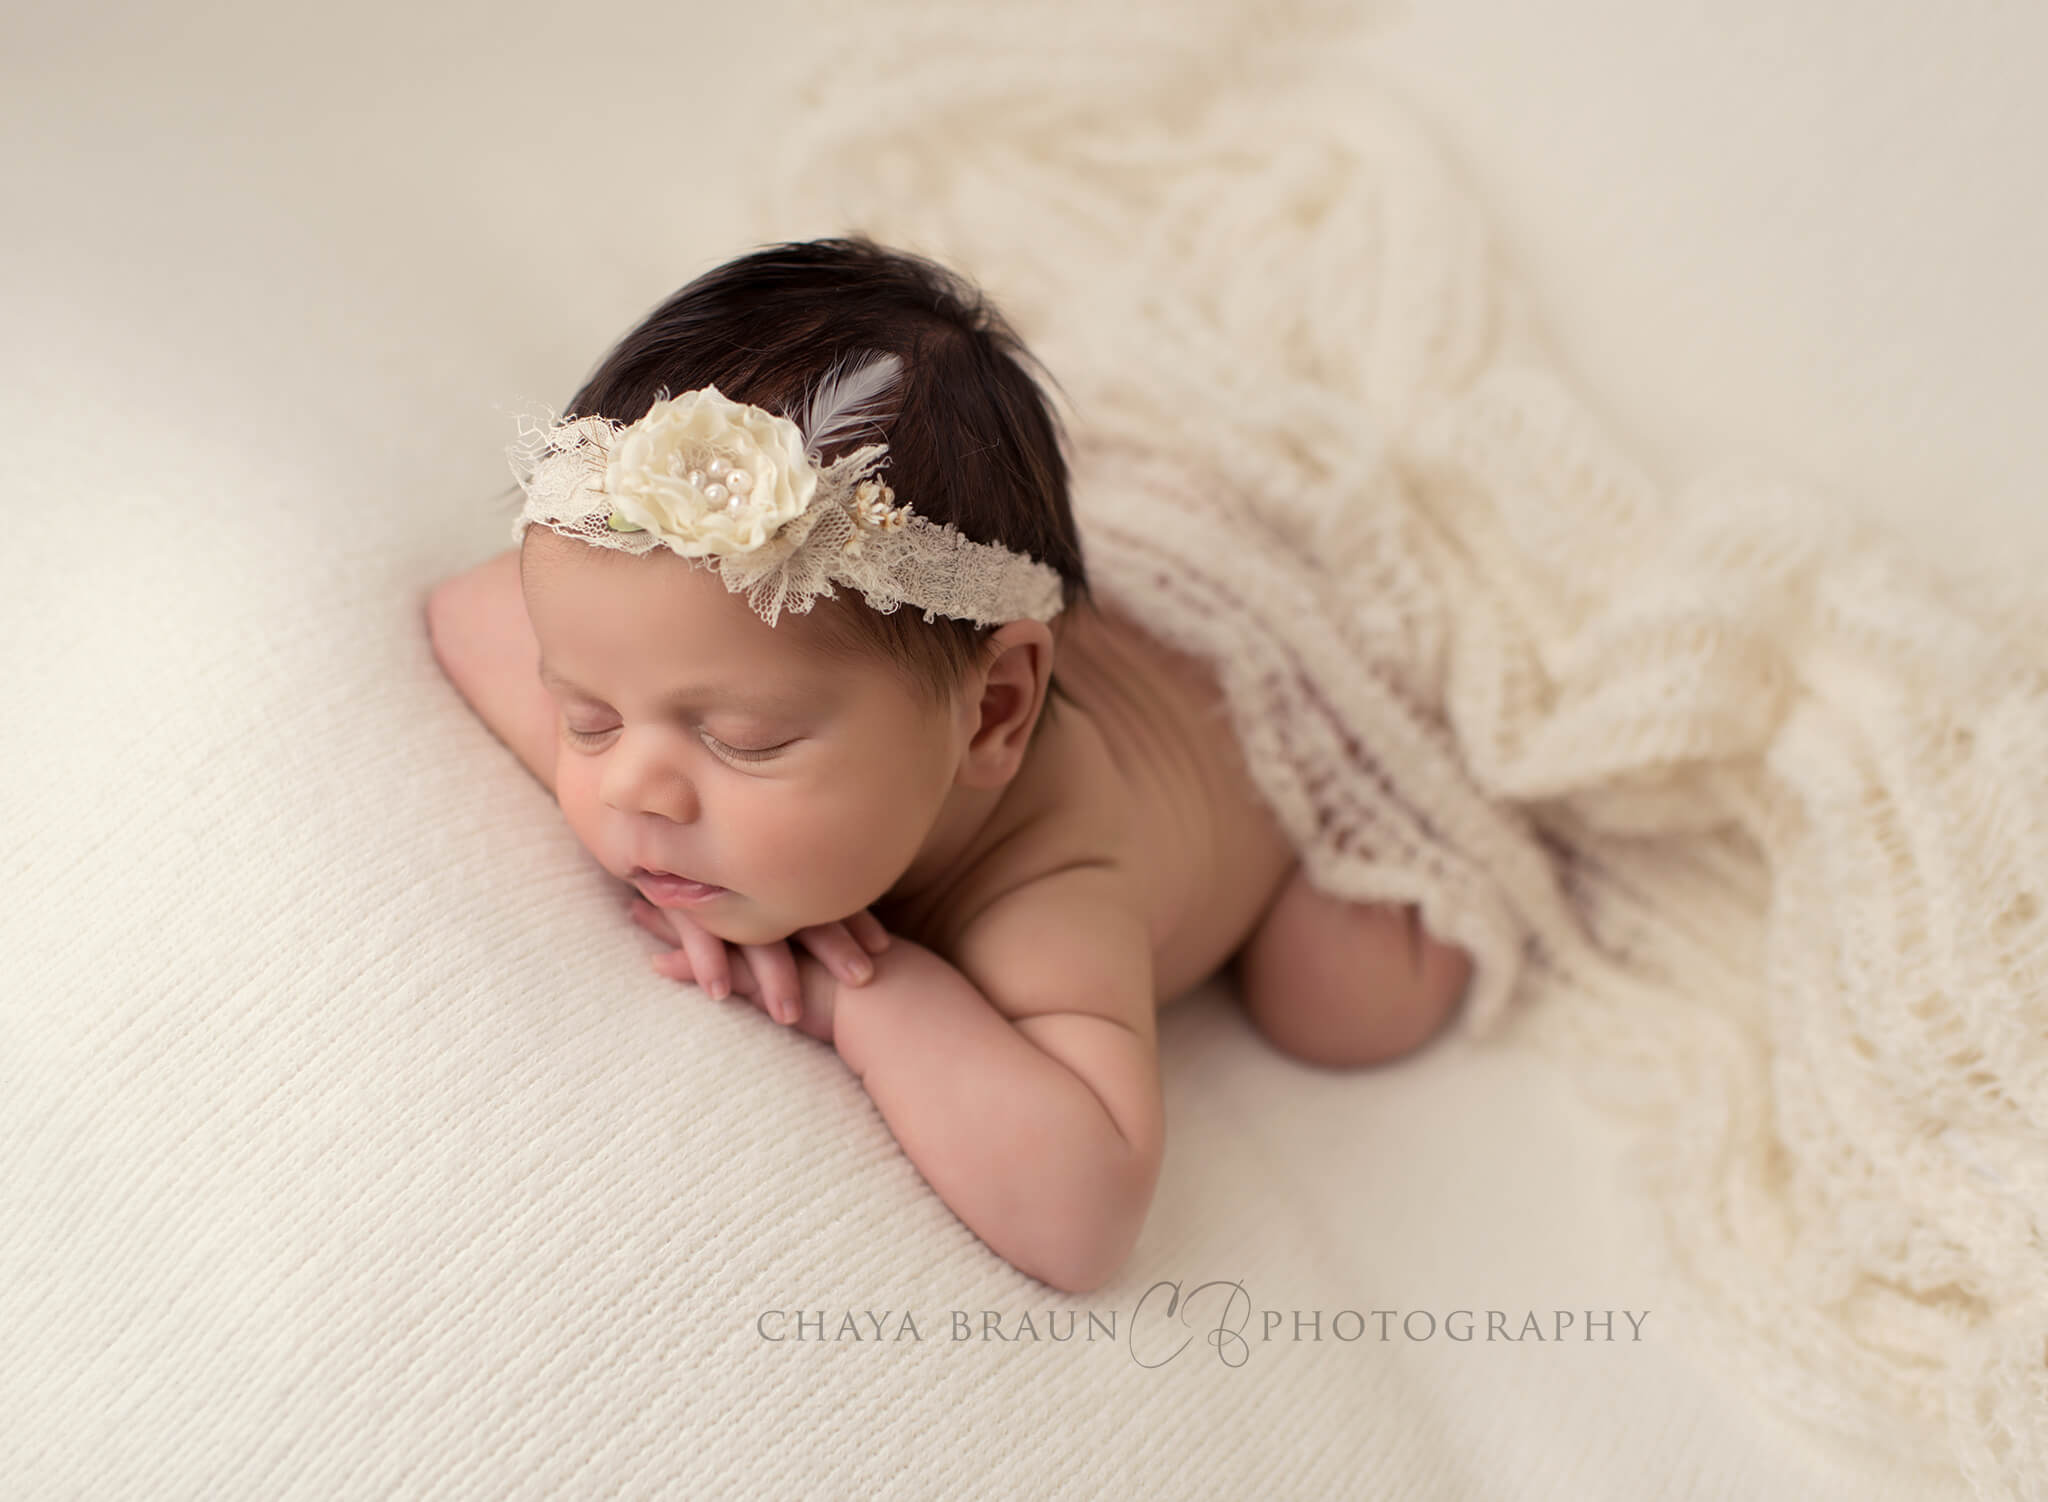 Baby photographer in Maryland